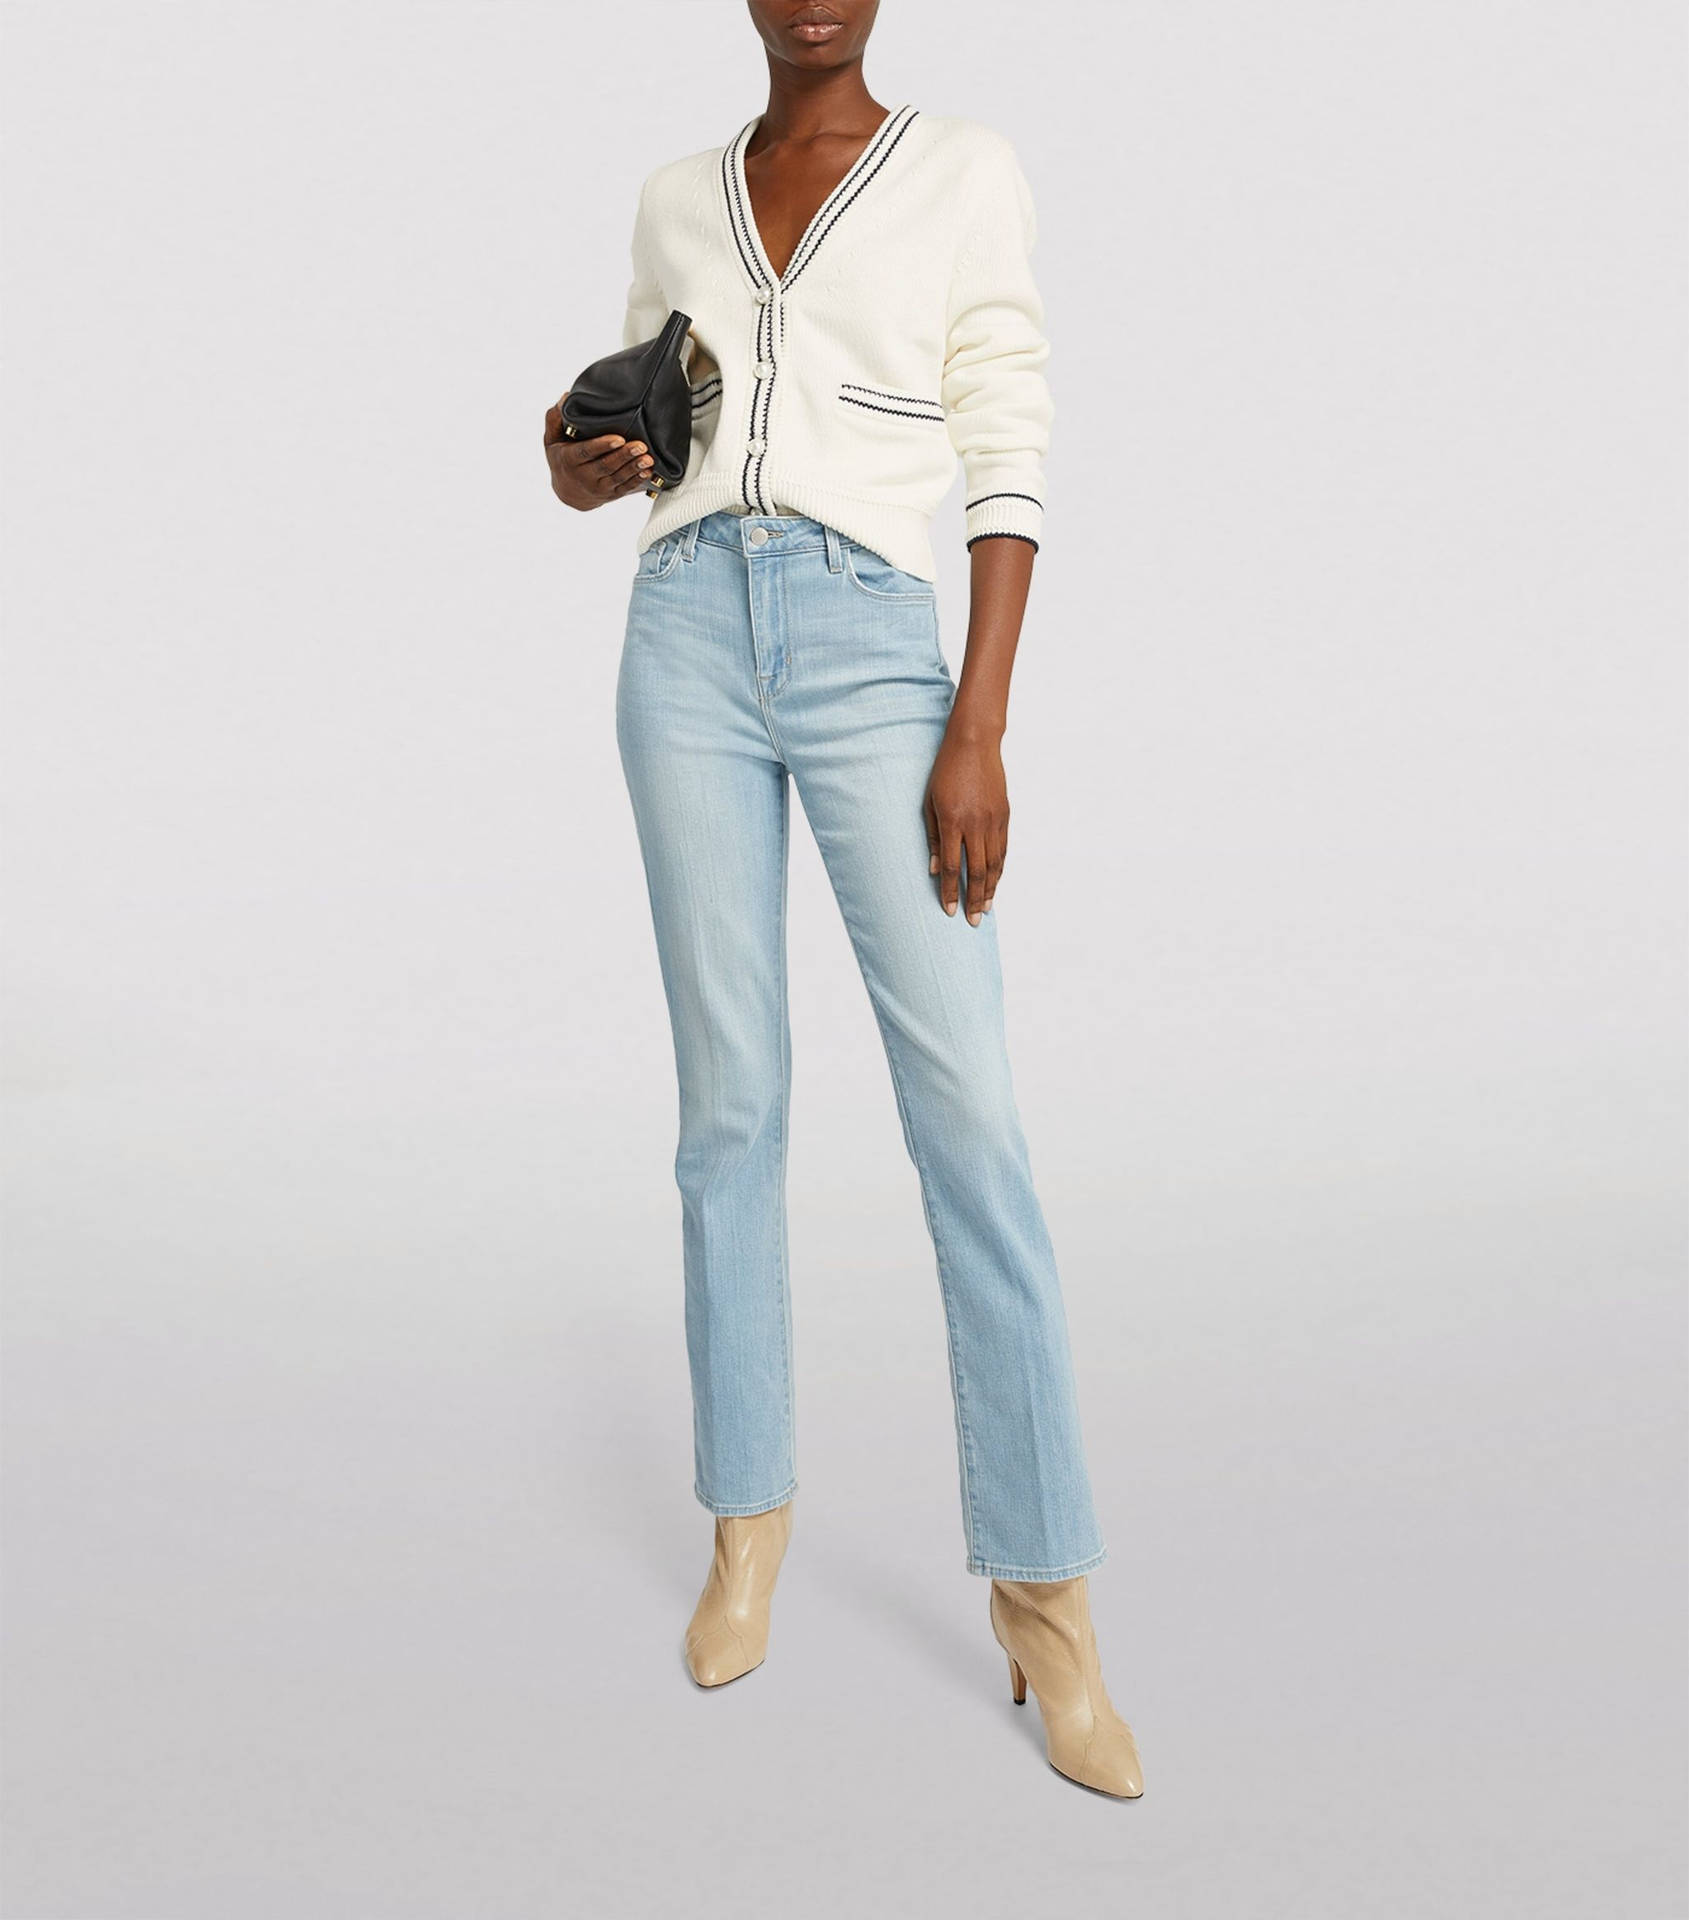 Claudie Pierlot White Cardigan And Jeans Wallpaper